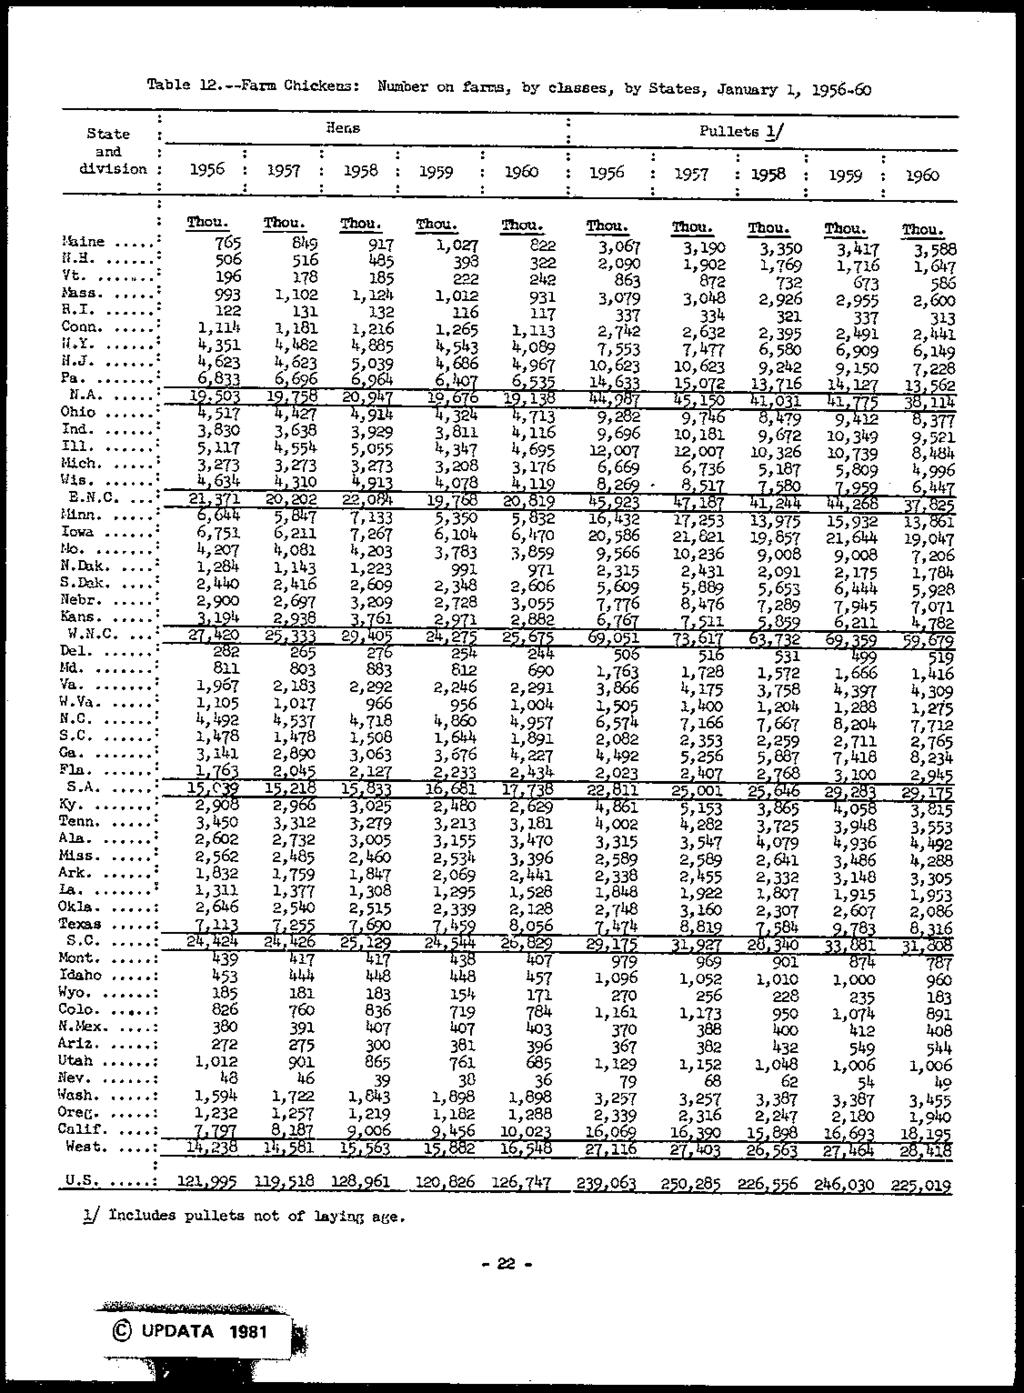 Table 12.--Farm Chickens: Number on farms, by classes, by States, January 1, 1956-60 State ner.s Pullets '!:,/ and : division: 1956 1957 1958 1959 1960 1956 19:;7 : 1958 1959 1960 Thou.